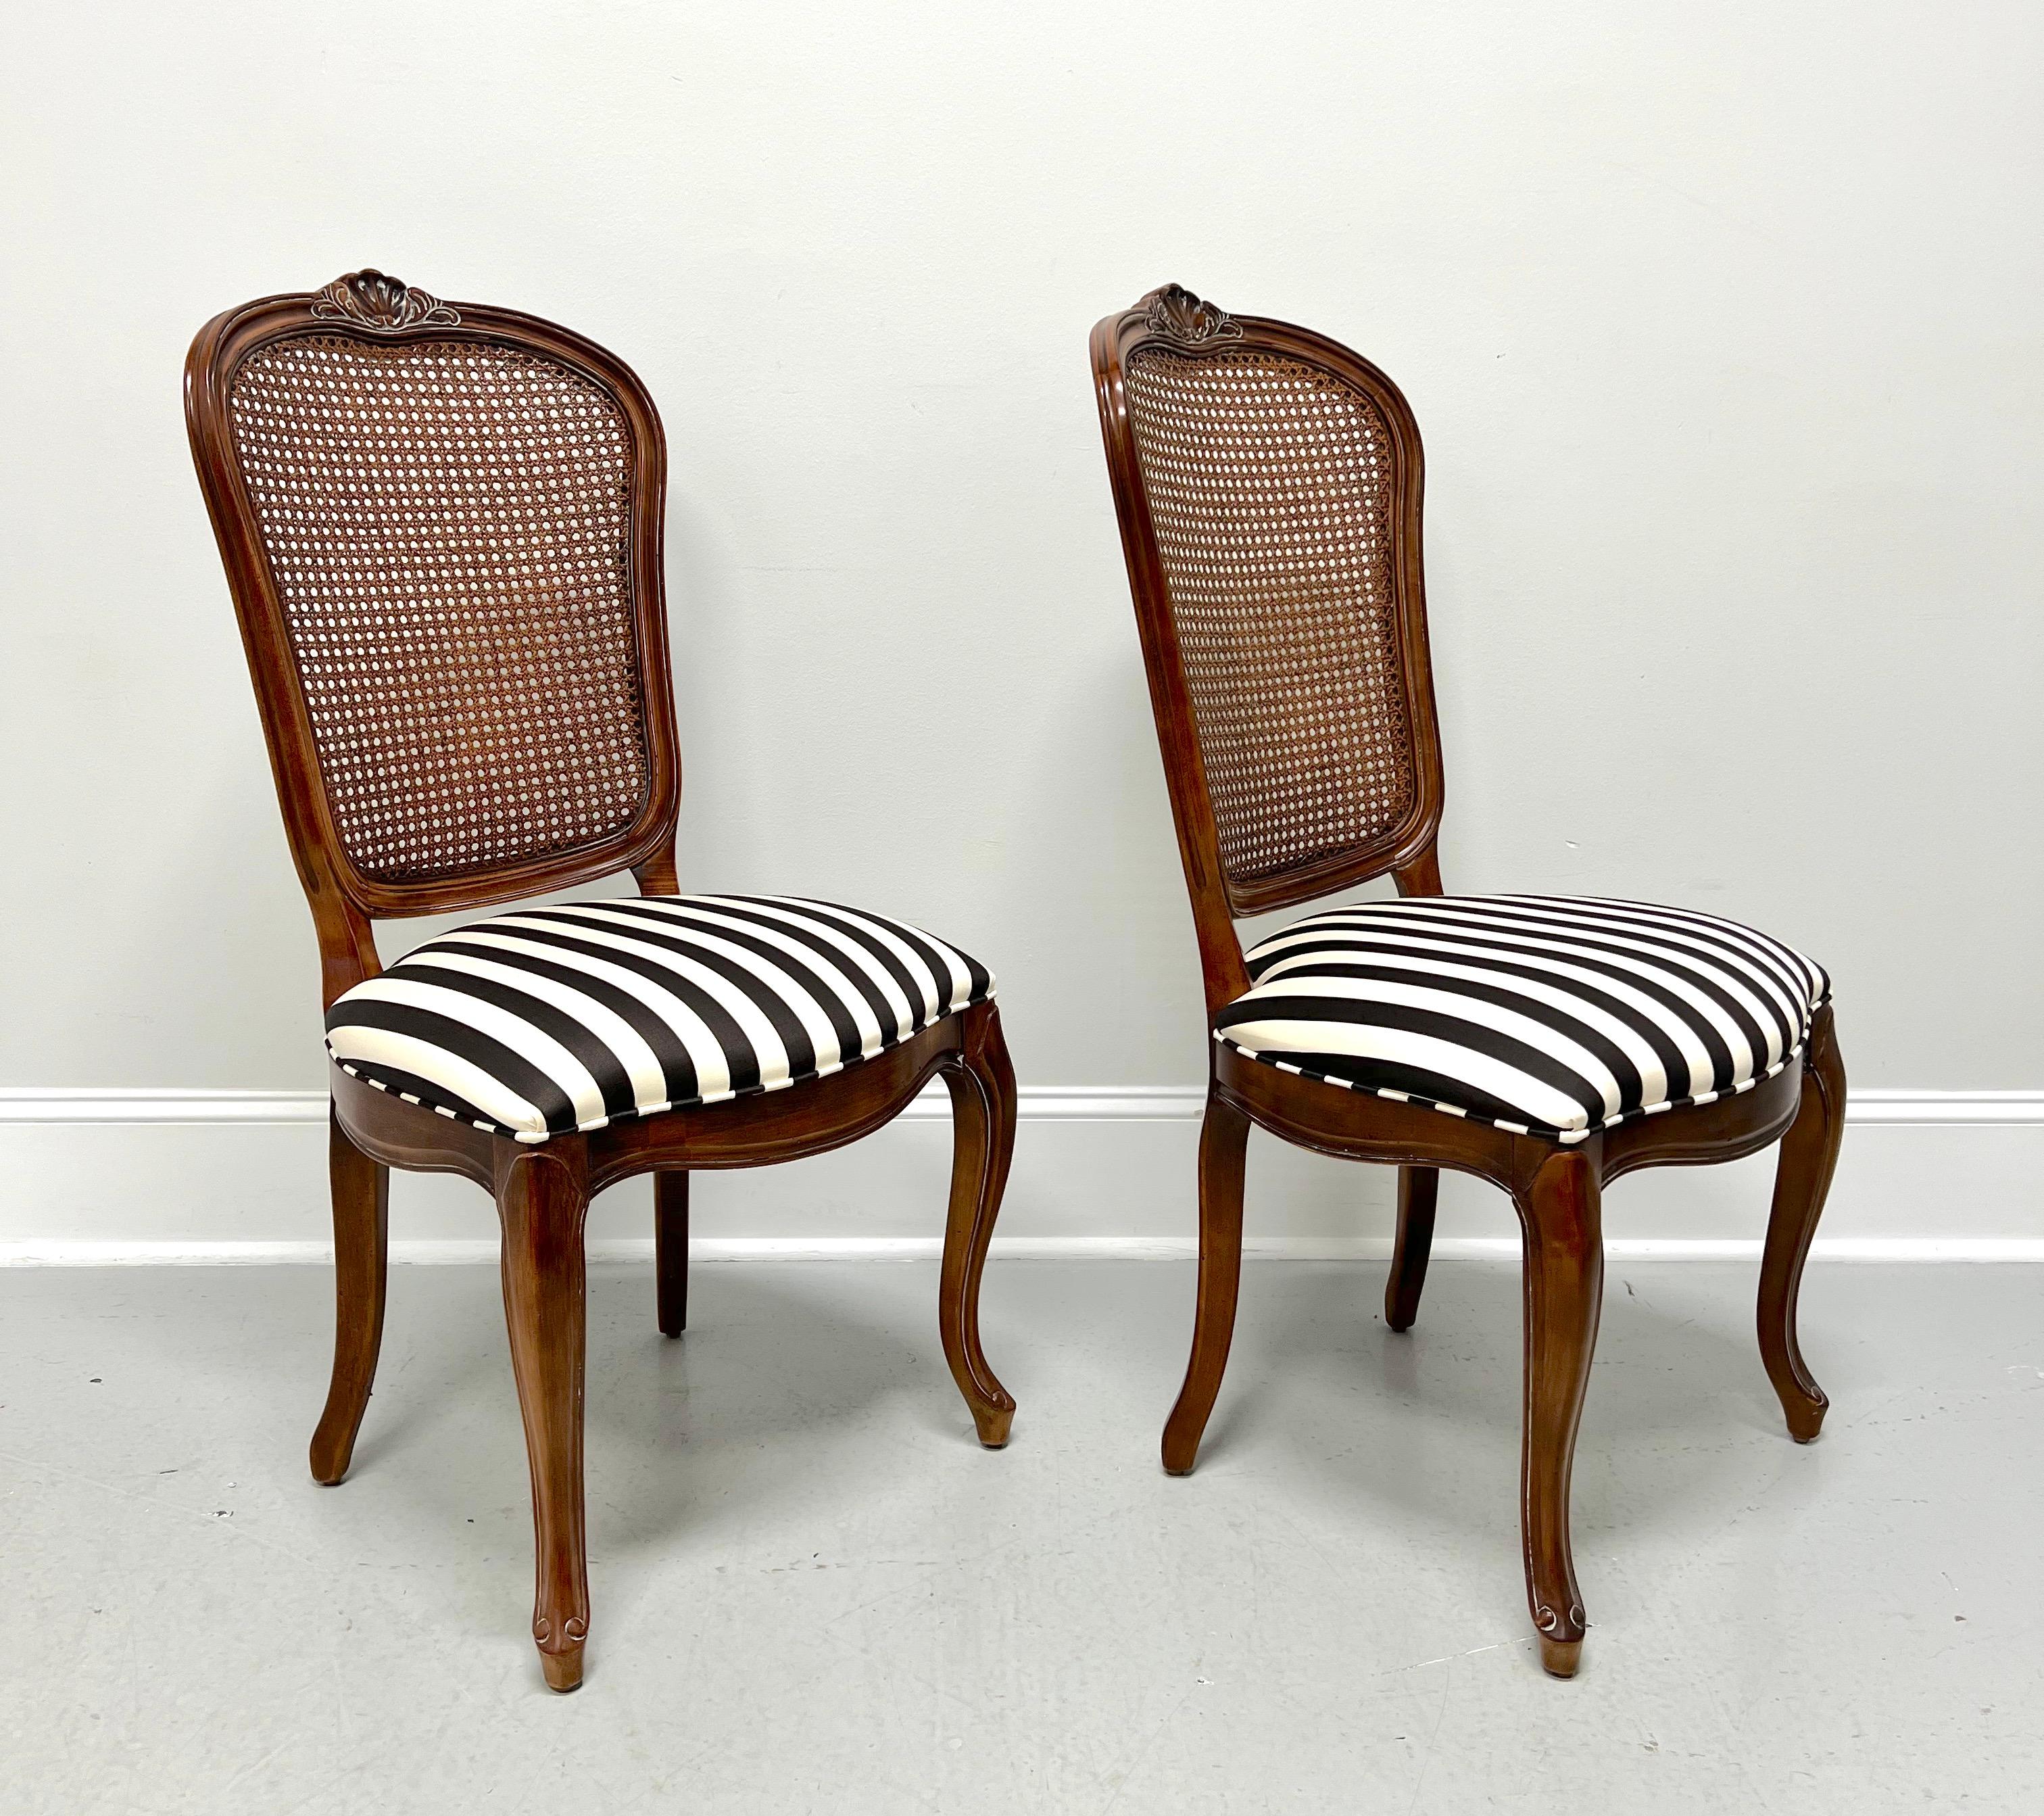 French Provincial CENTURY Chardeau Collection Cherry Caned French Dining Side Chairs - Pair C